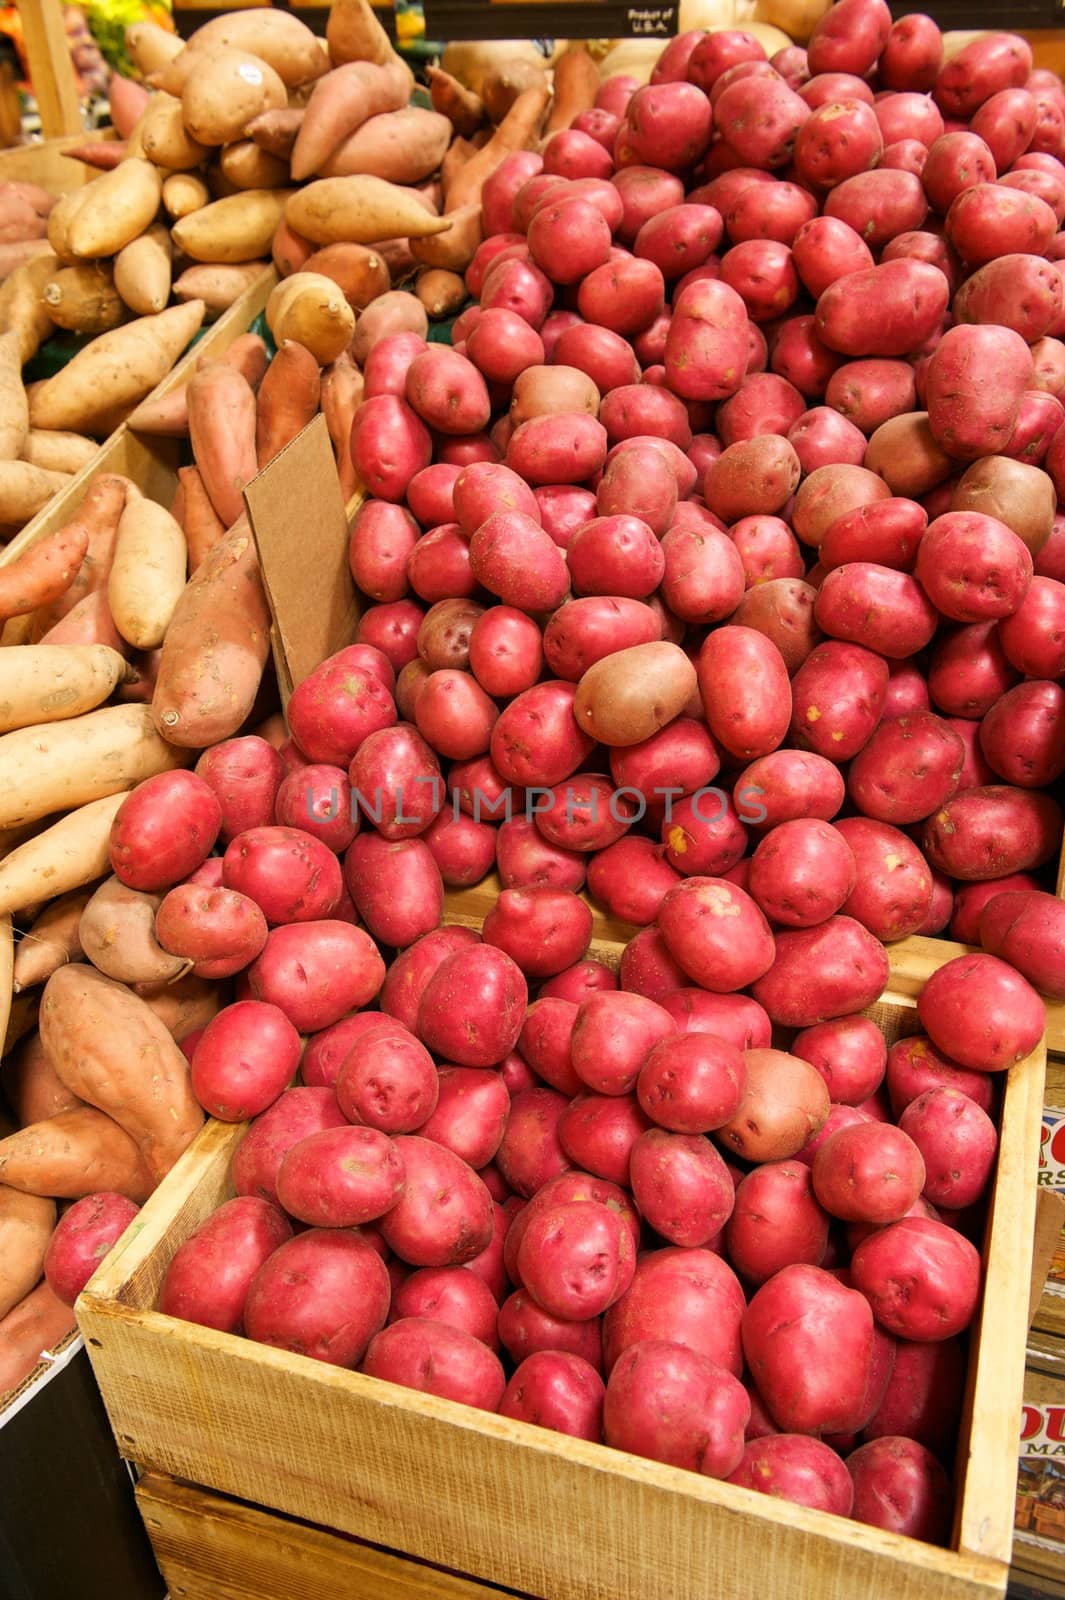 Wooden crate full of fresh and clean red Russet potatoes